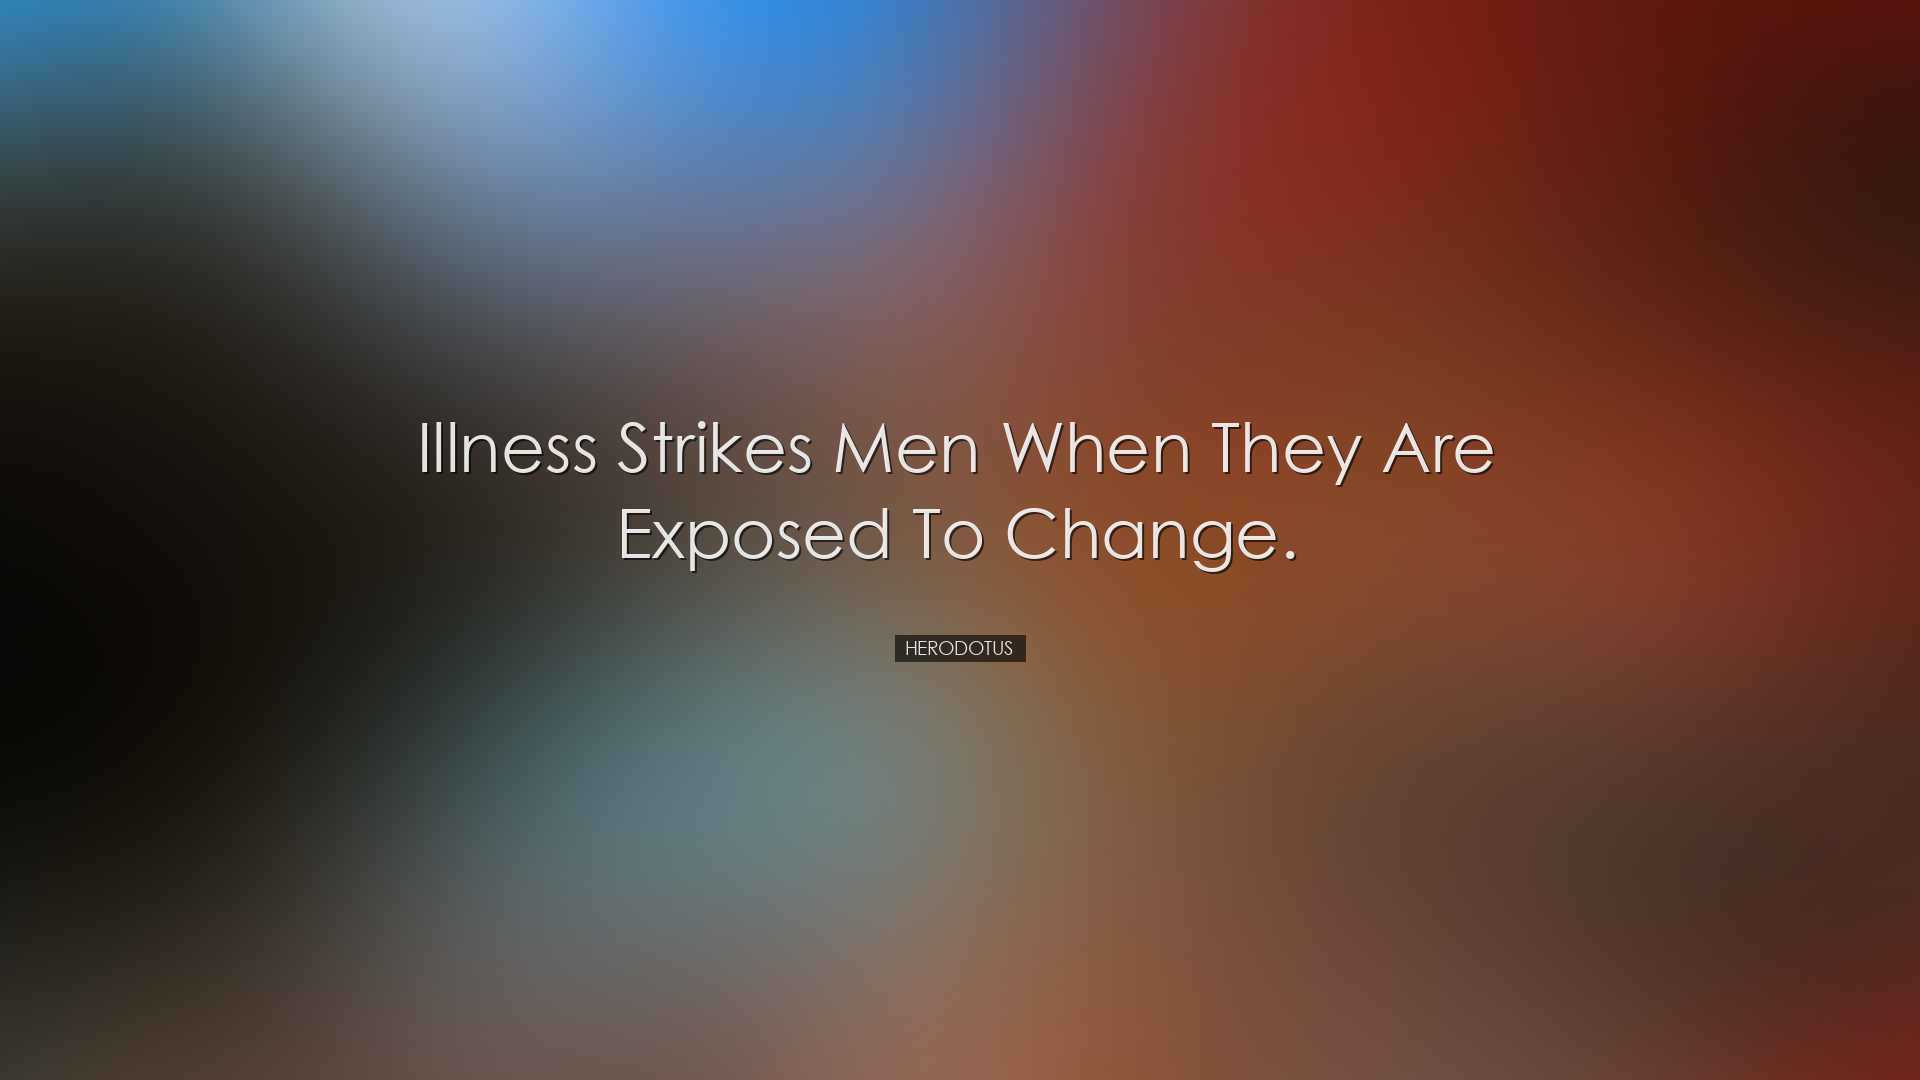 Illness strikes men when they are exposed to change. - Herodotus